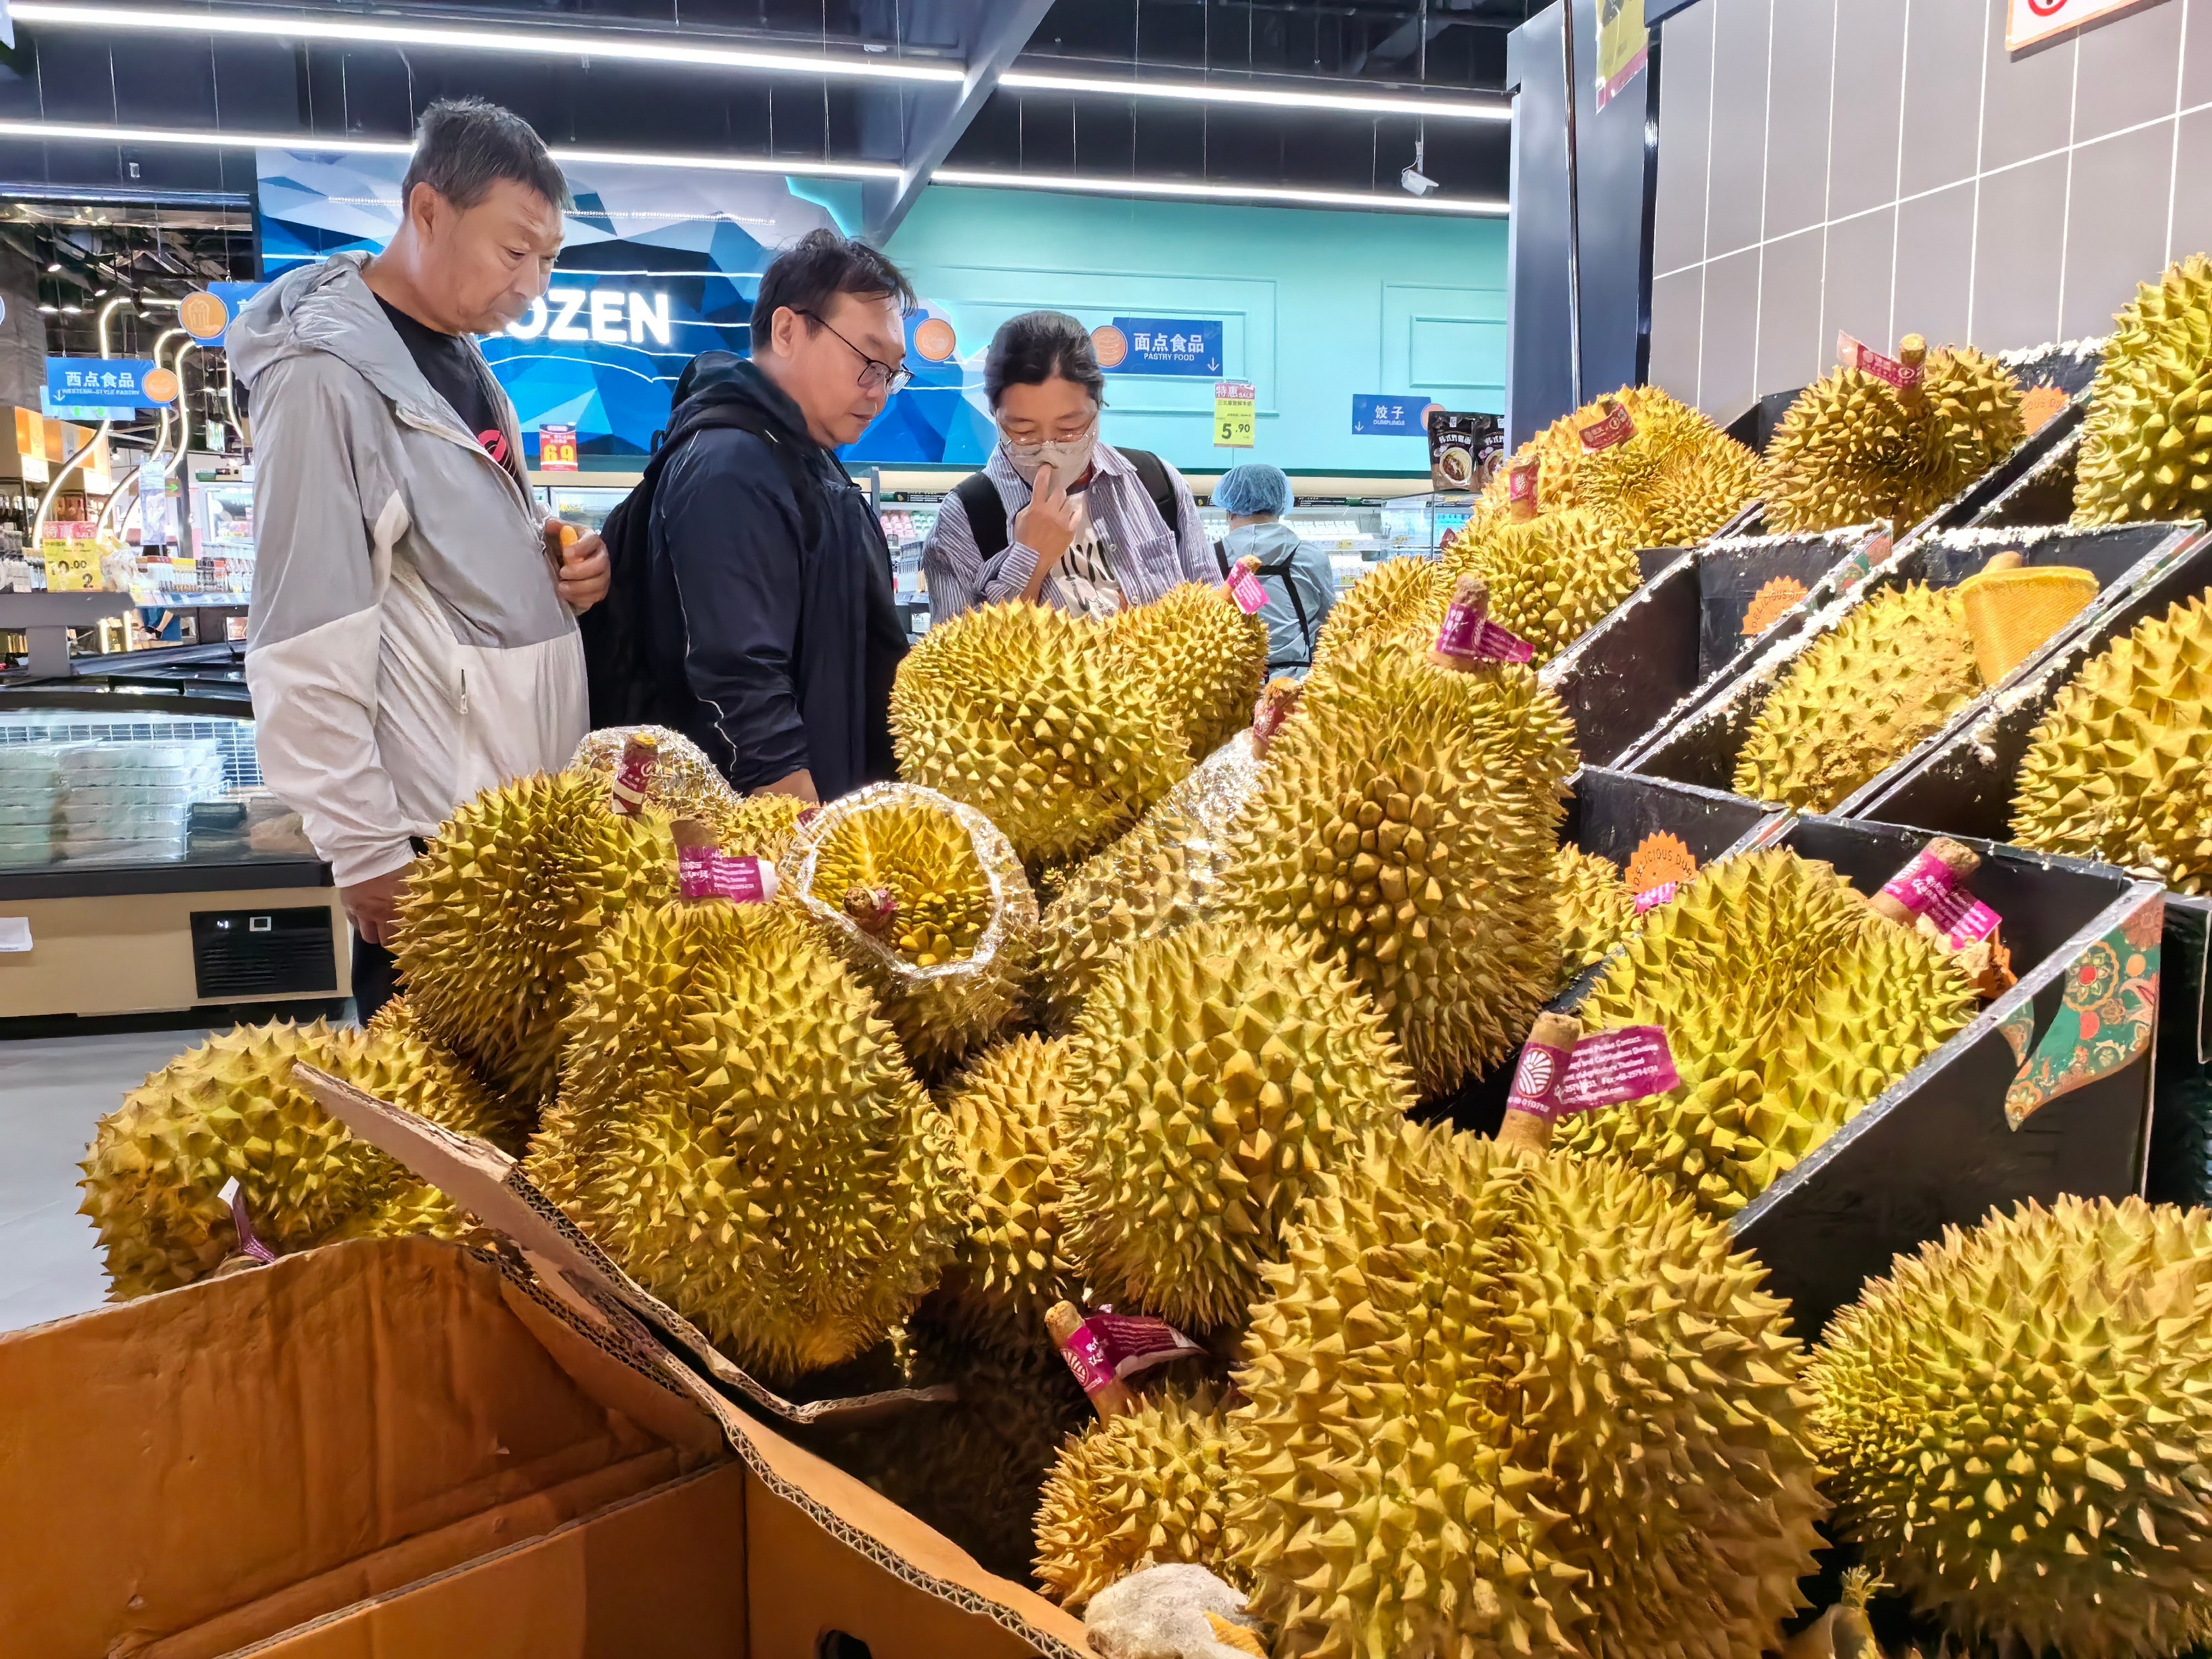 China’s ravenous appetite for durian has led to an explosion in fresh fruit imports from countries like Thailand, Vietnam and now Malaysia. Photo: Simon Song